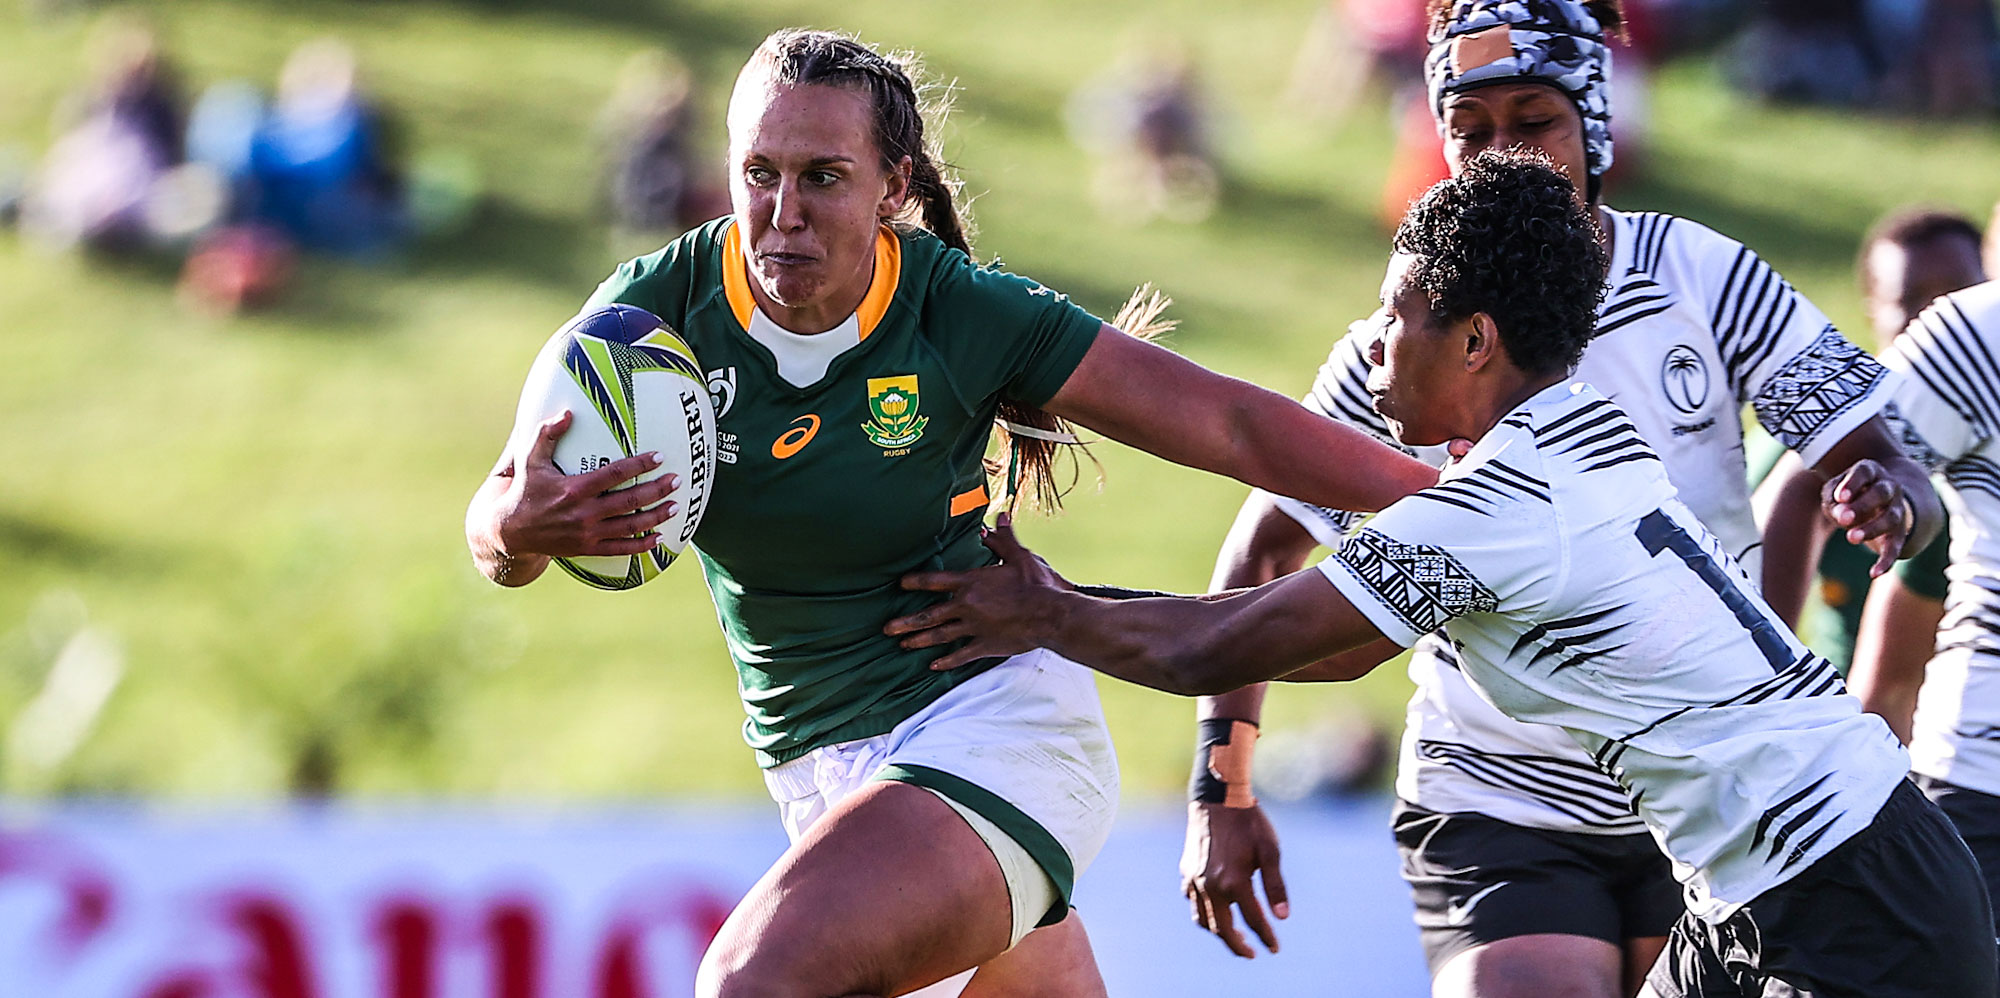 Libbie Janse van Rensburg kicked seven points to surpass 100 Test points for South Africa.